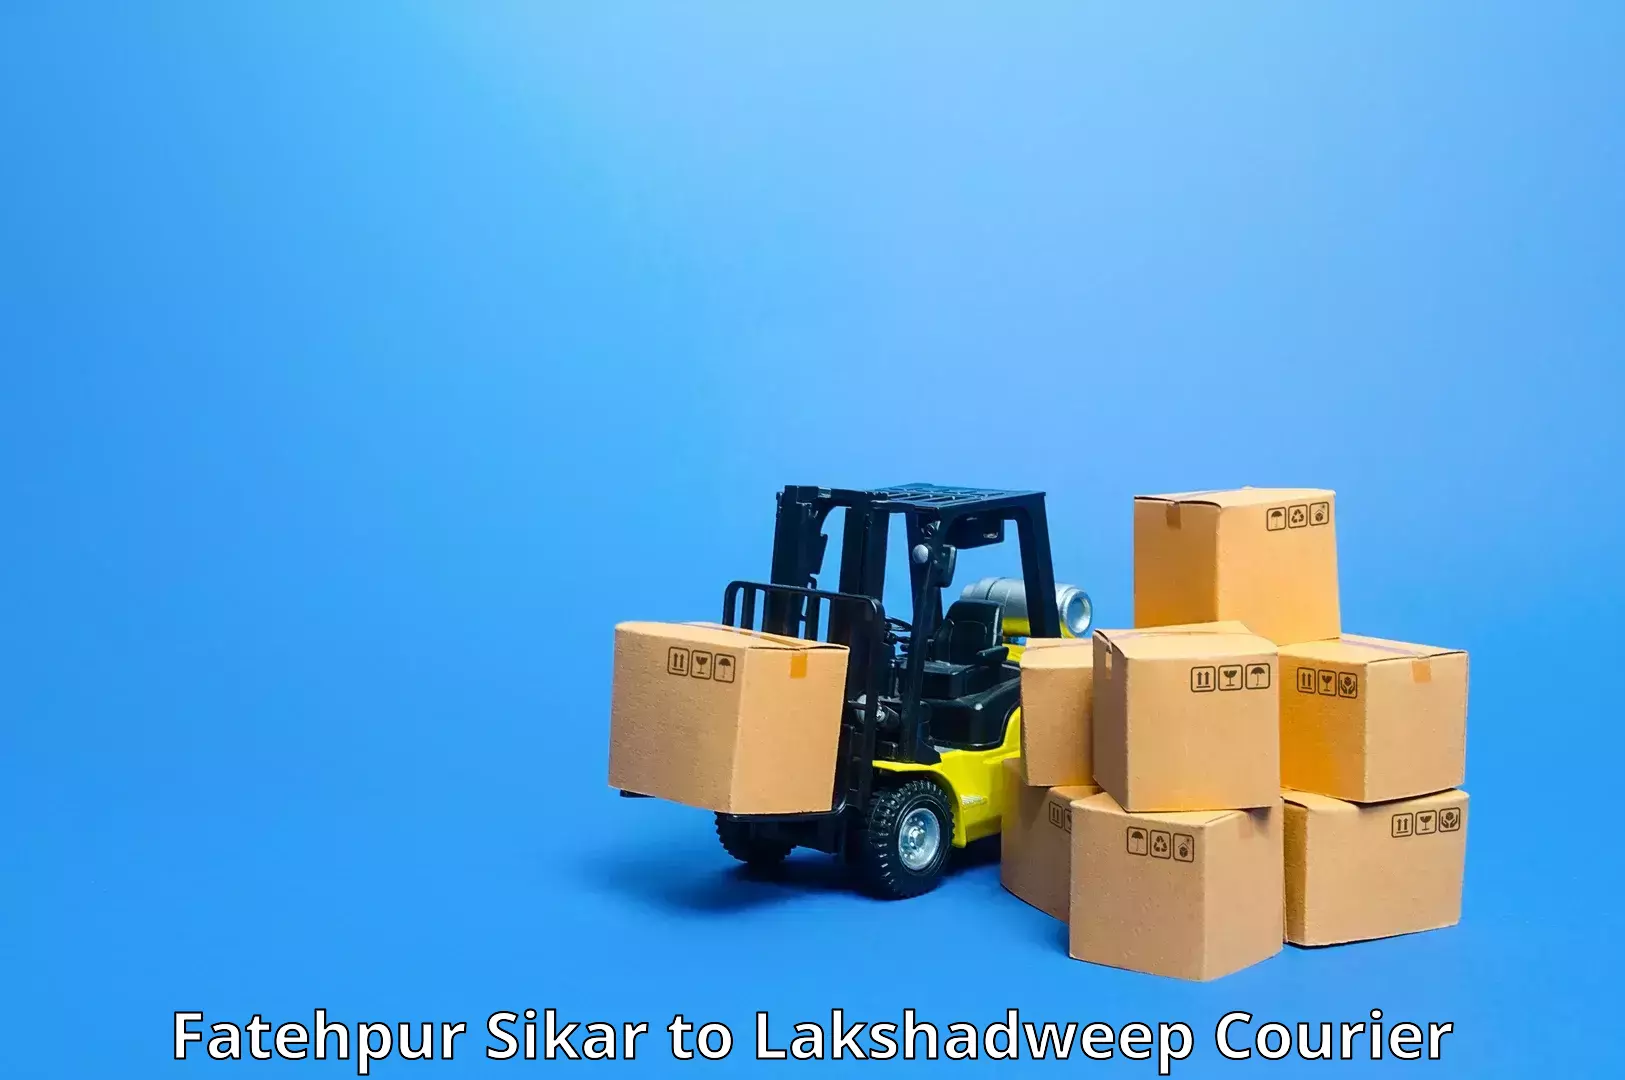 High-speed delivery Fatehpur Sikar to Lakshadweep